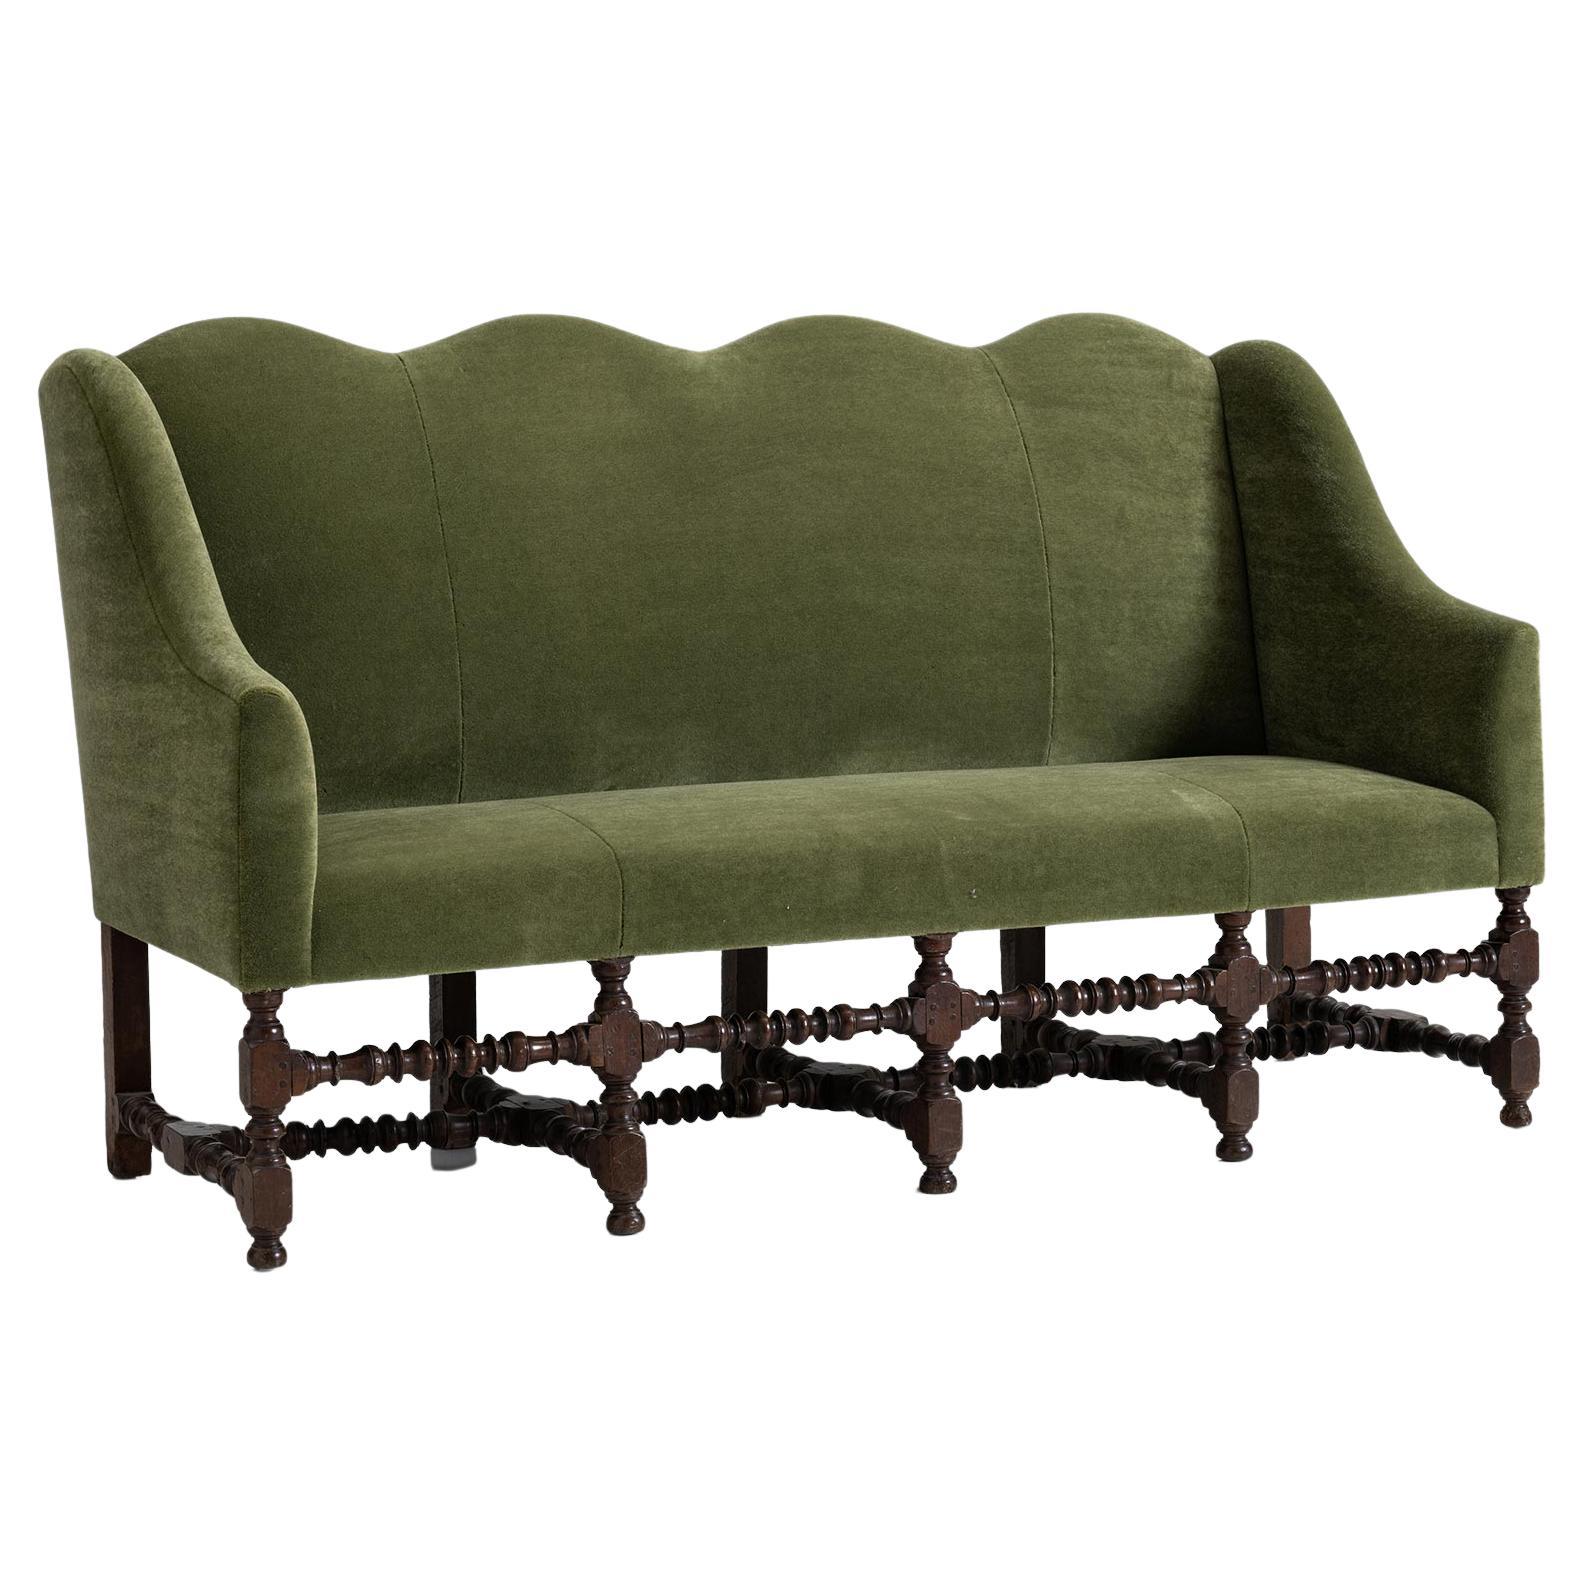 Louis XIII Style Sofa in Mohair Velvet from Pierre Frey, France Circa 1840